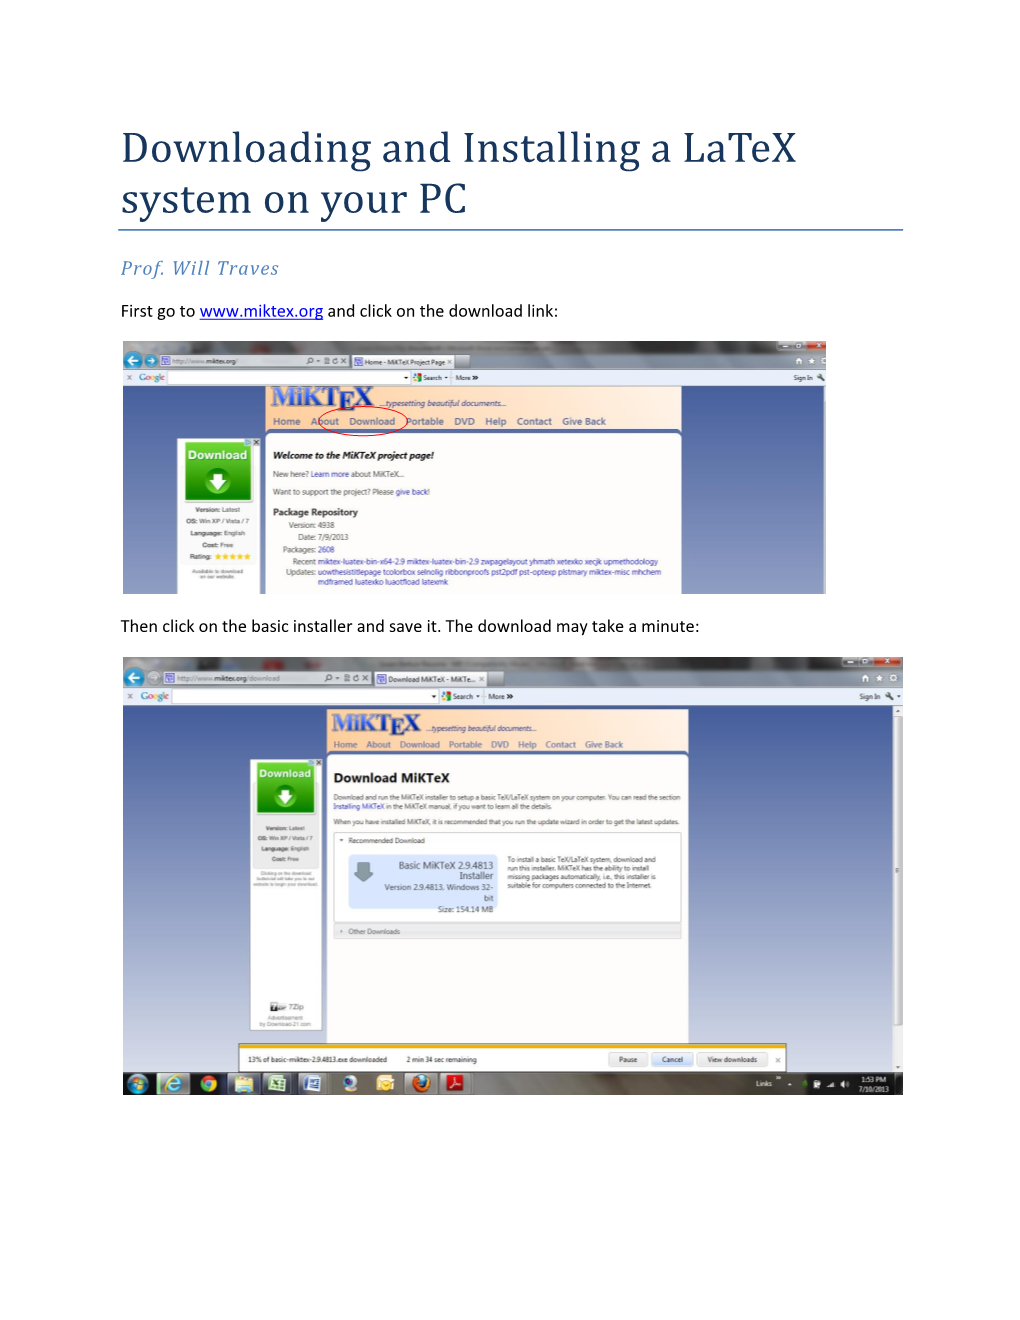 Downloading and Installing a Latex System on Your PC